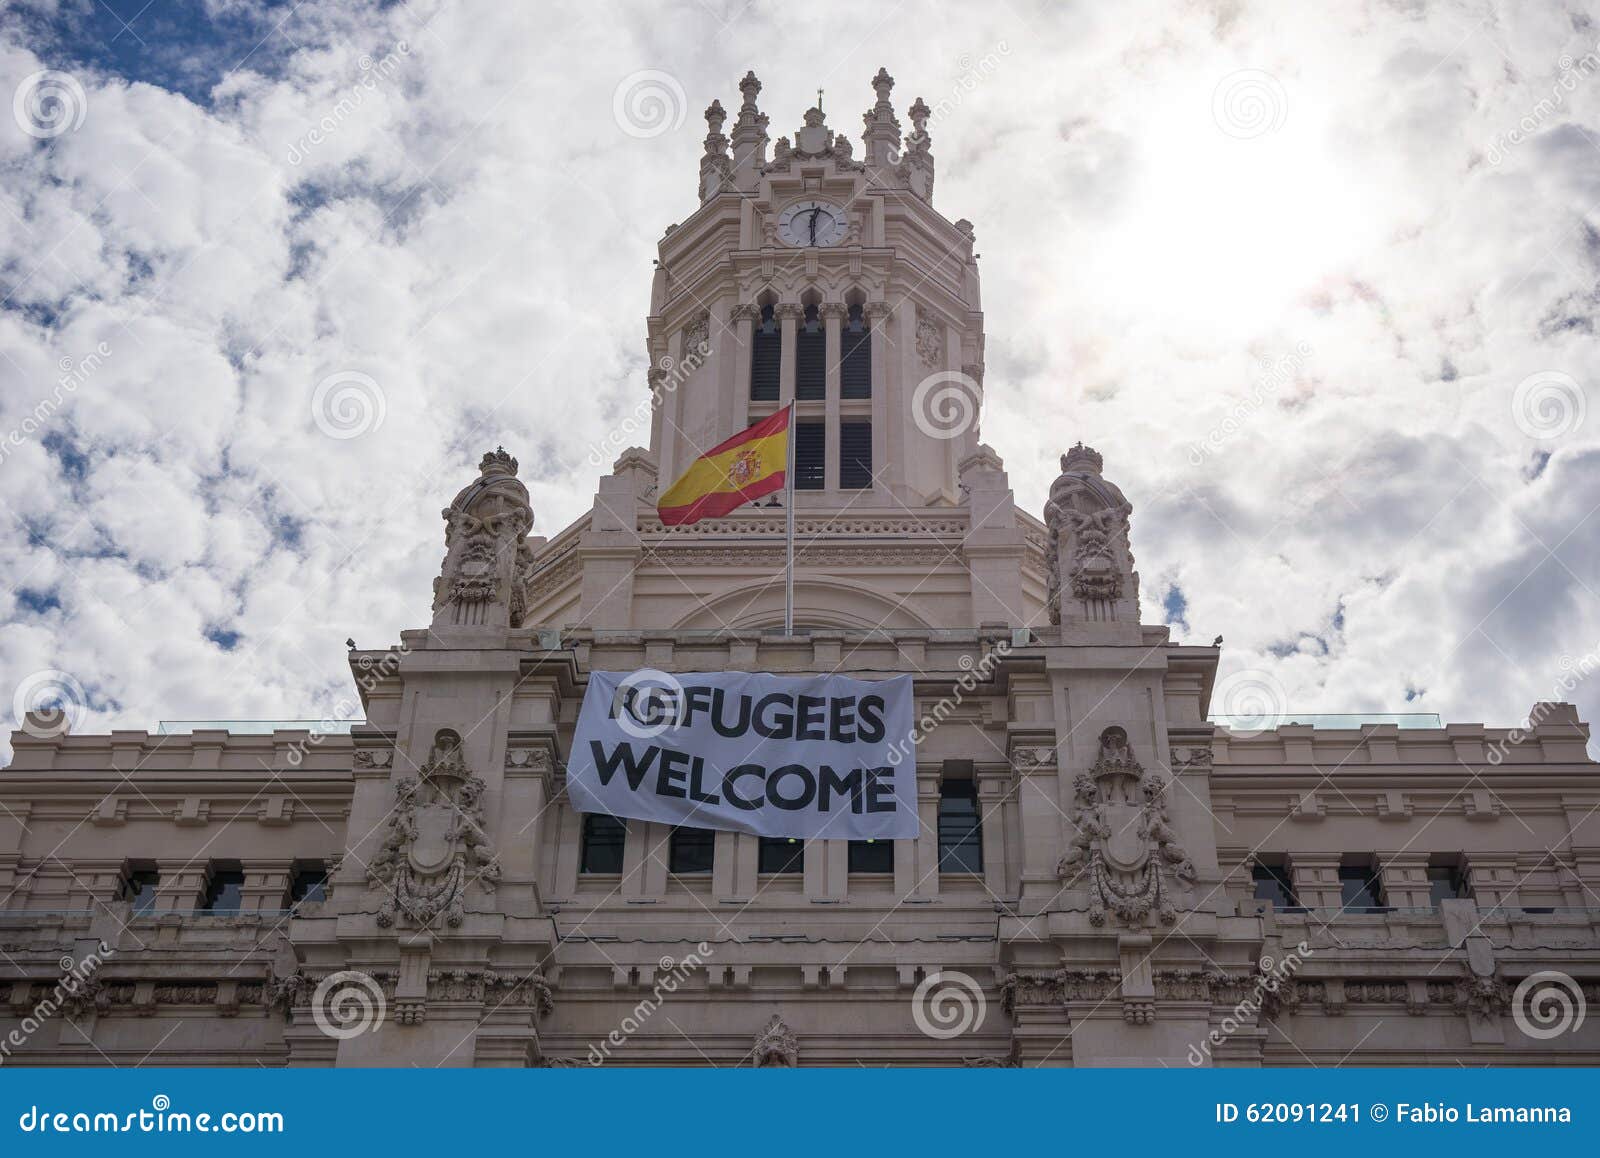 refugees welcome placard